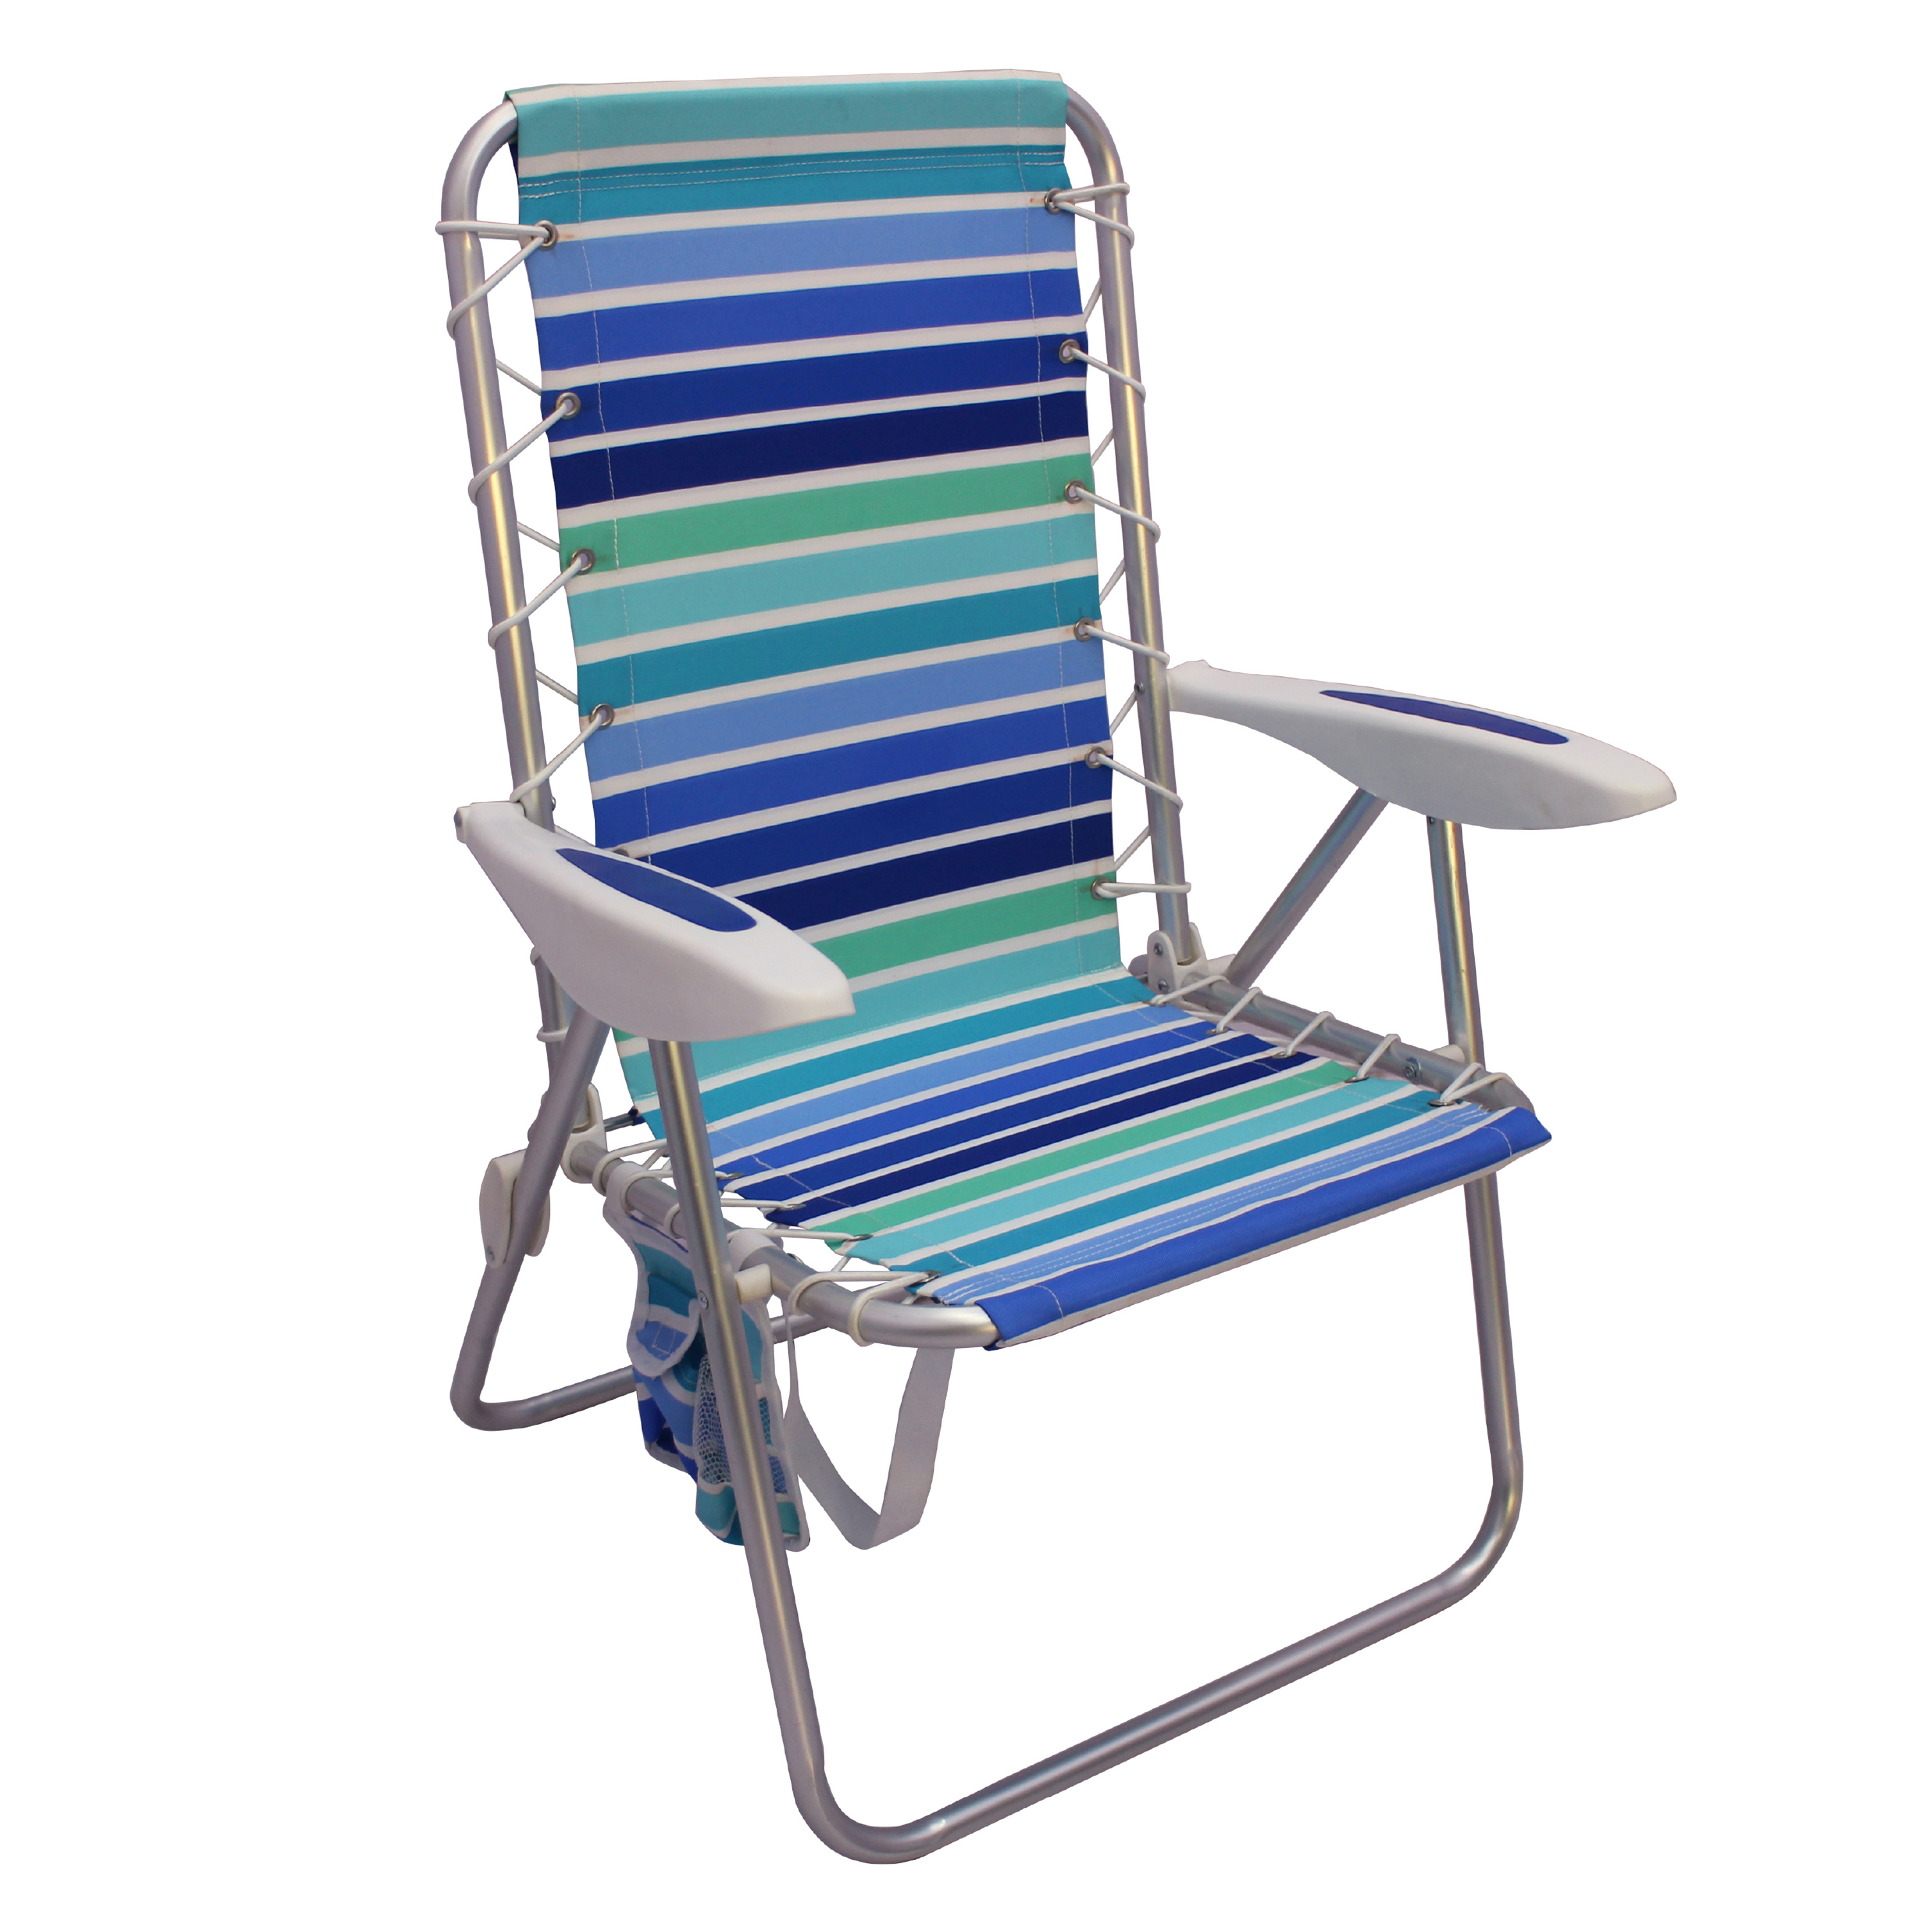 Mainstays Reclining Bungee Beach Chair Blue & Green Stripe - image 1 of 8